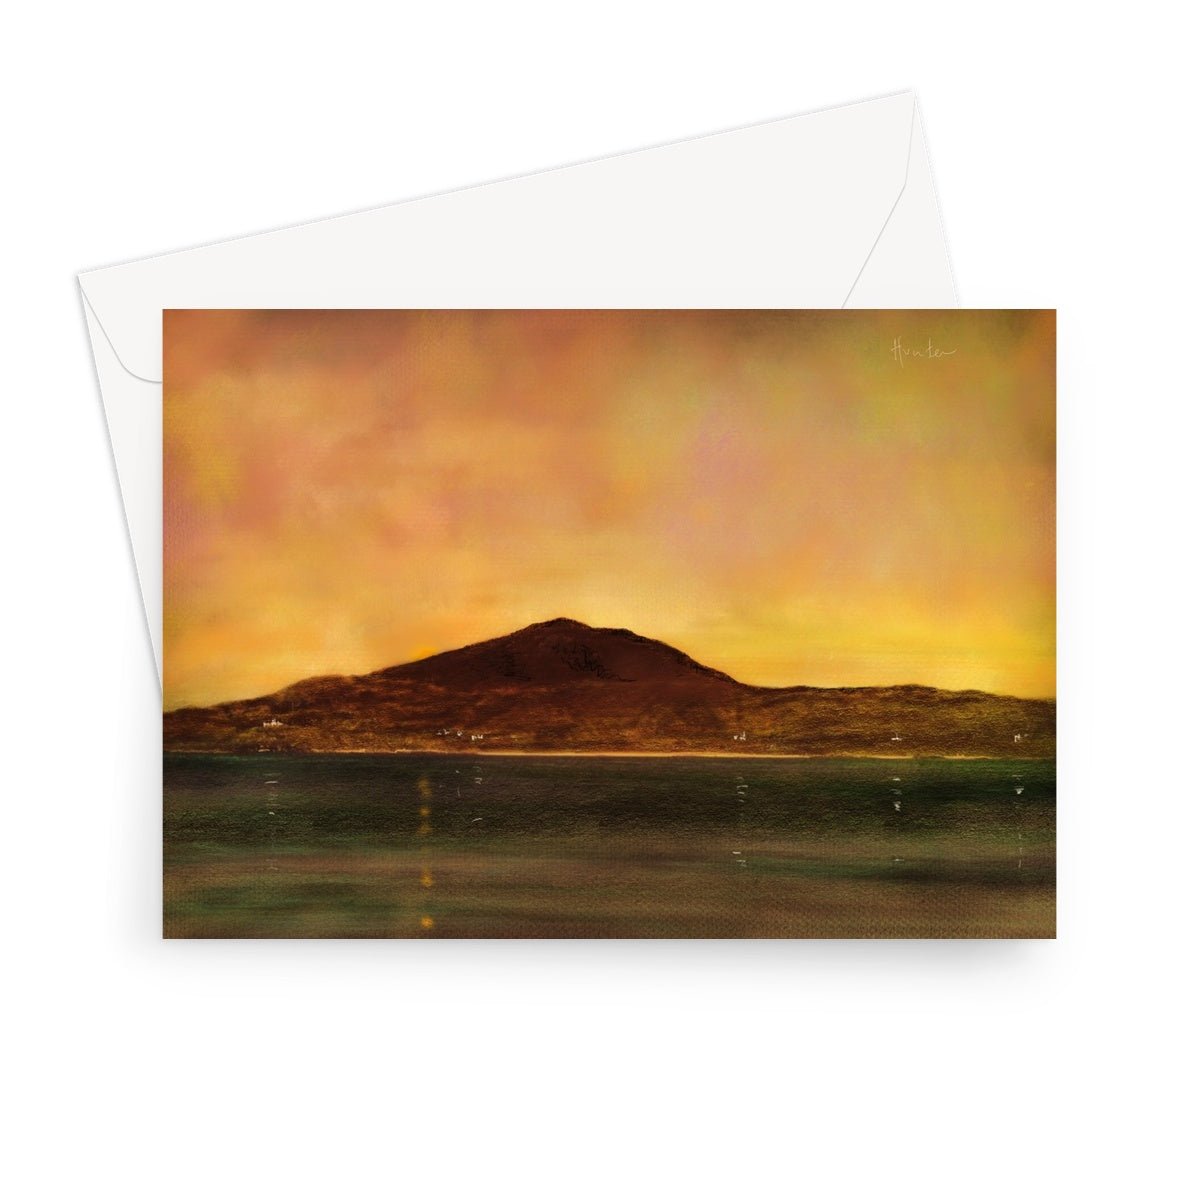 Eriskay Dusk Art Gifts Greeting Card-Greetings Cards-Hebridean Islands Art Gallery-7"x5"-1 Card-Paintings, Prints, Homeware, Art Gifts From Scotland By Scottish Artist Kevin Hunter